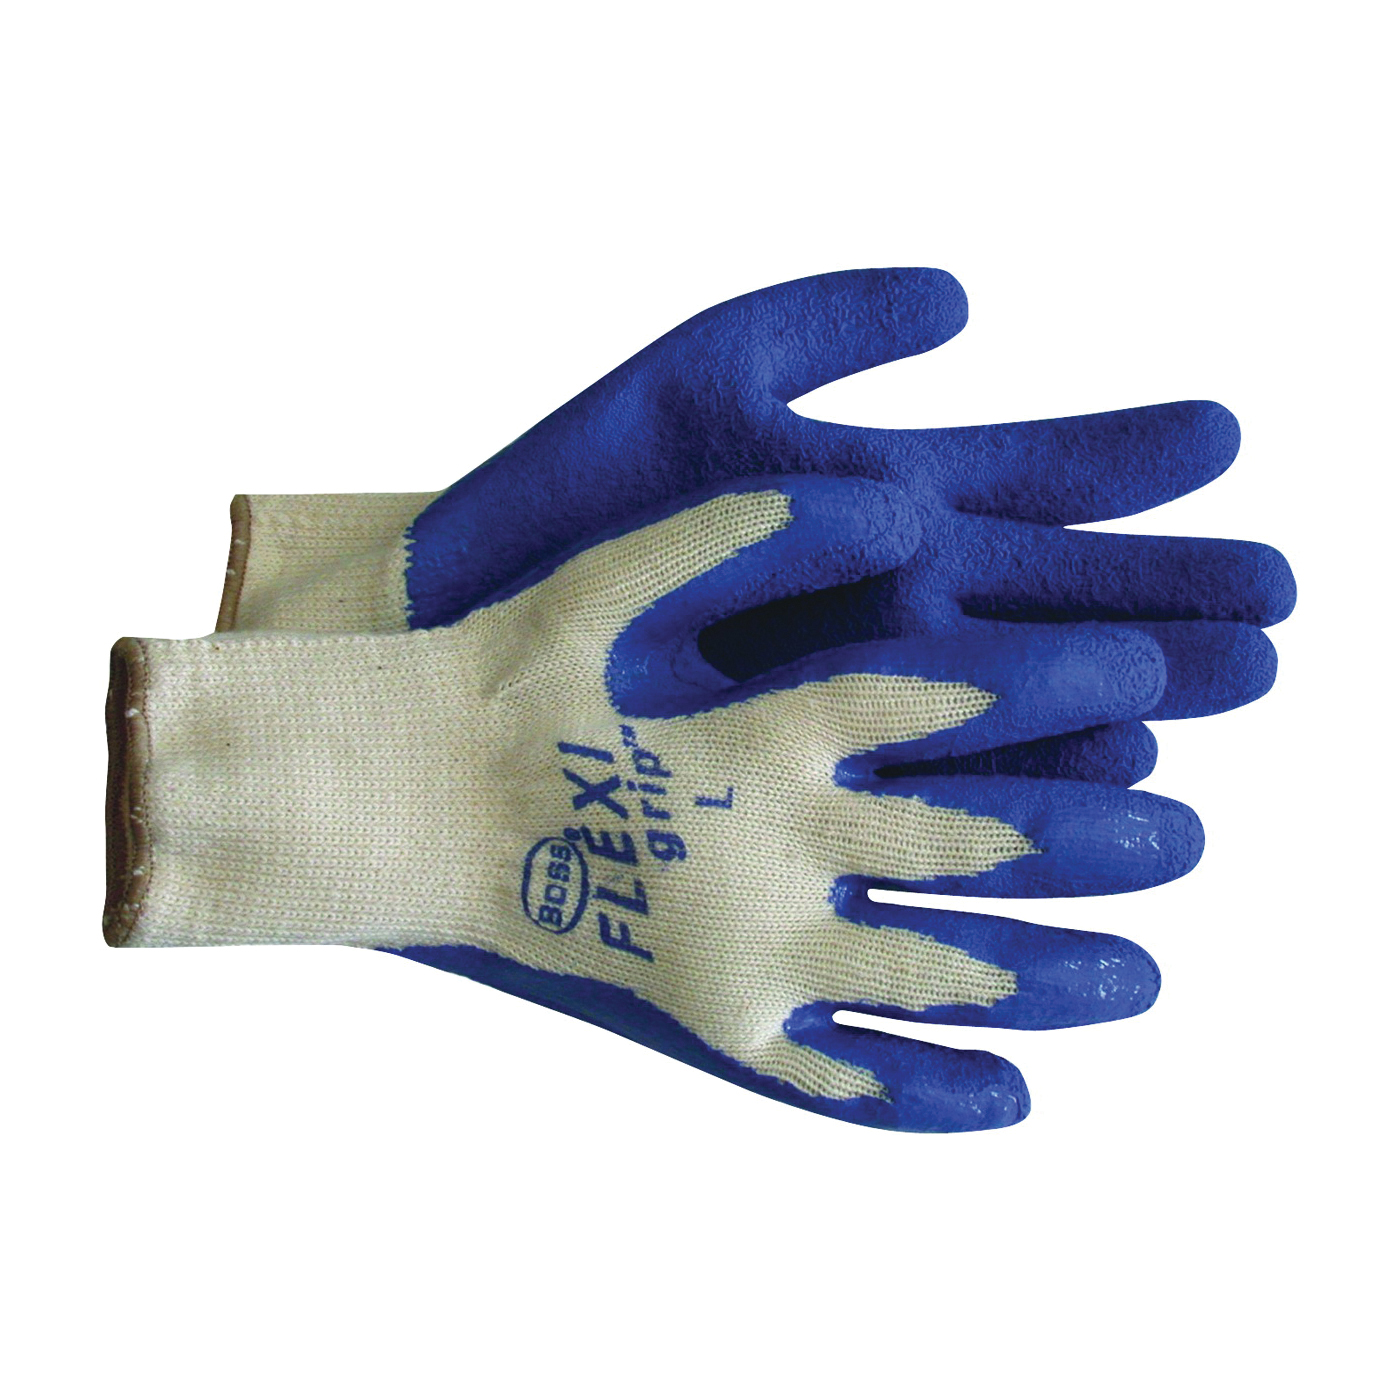 Boss 8426S Protective Gloves, S, Knit Wrist Cuff, Latex Coating, Blue - 1